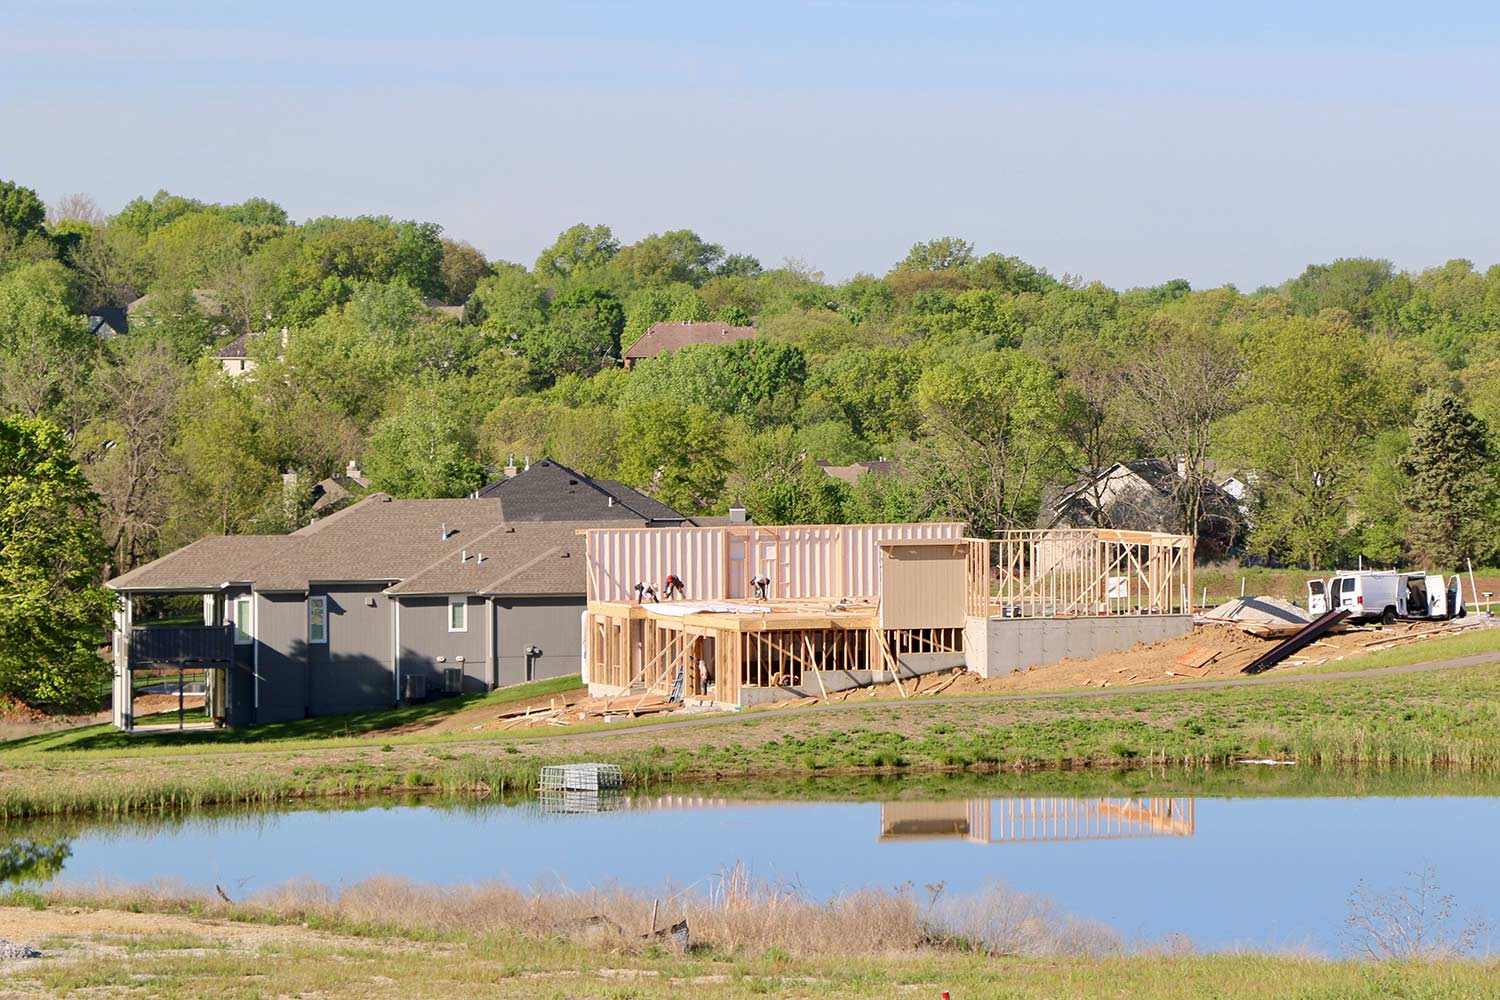 Homes being built in Kenneth Estates by the lake